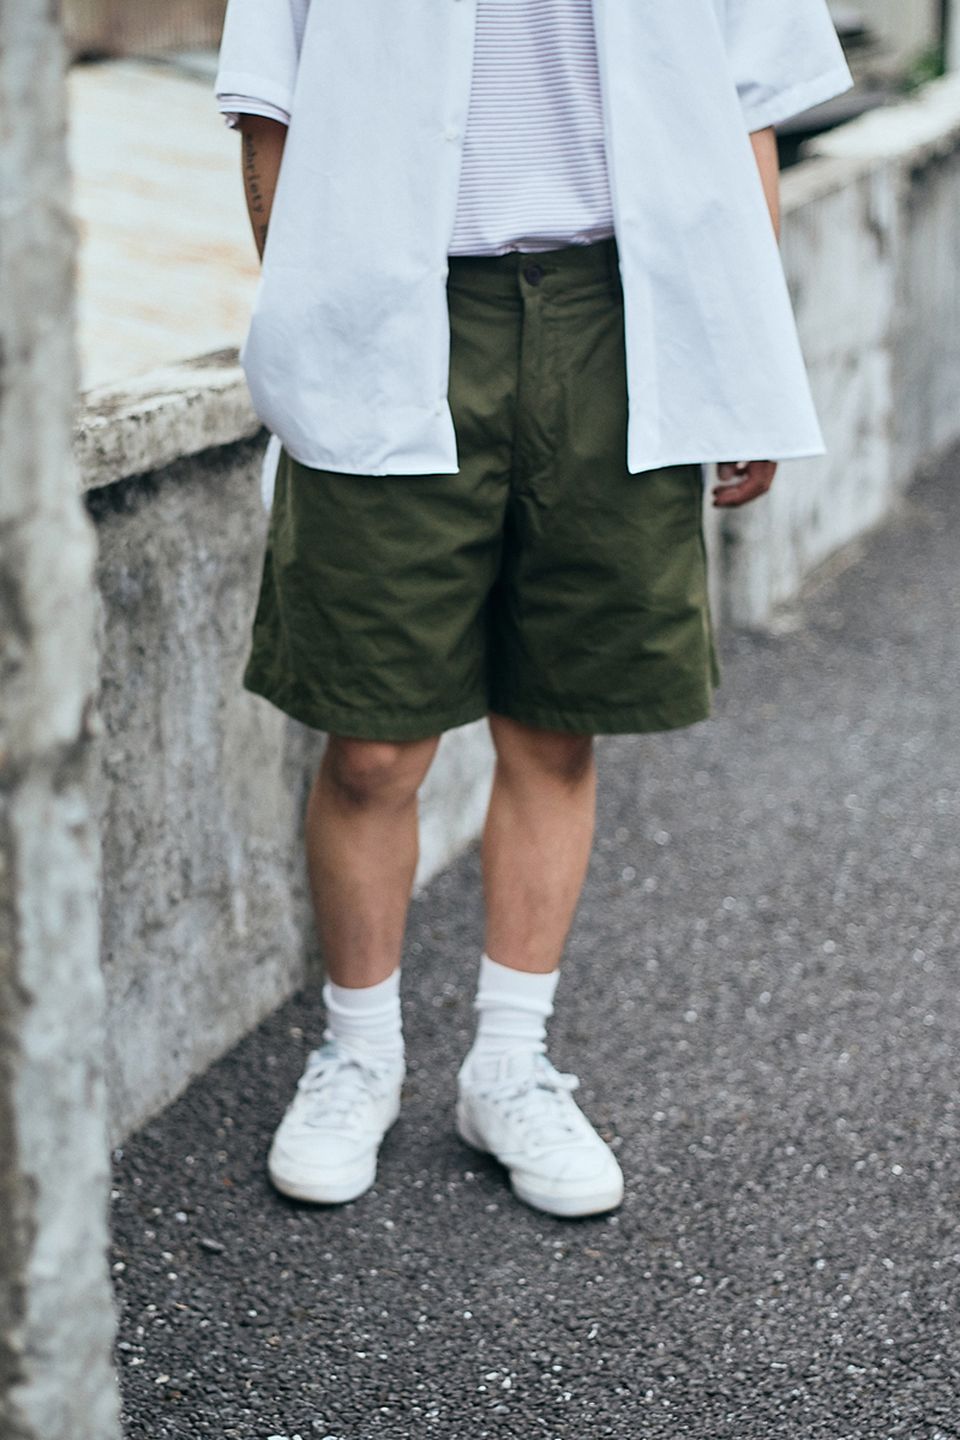 KUON x Wism Military Shirts, Shorts & Bags Collaboration